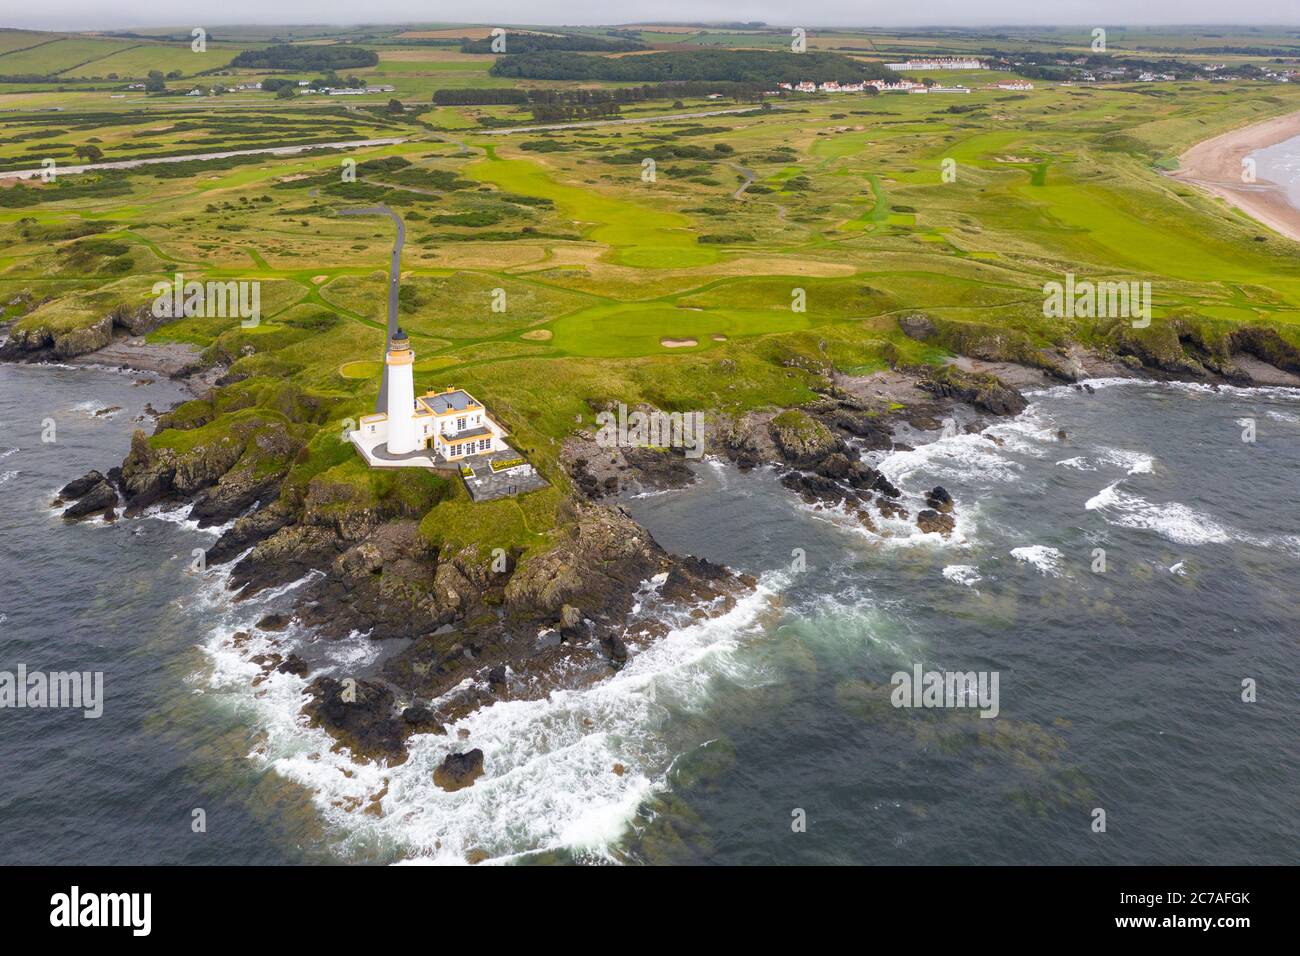 Turnberry, Scotland, UK. 15 July, 2020. General aerial views of Trump Turnberry Golf Club and Hotel on the Ayrshire coast. Trump Turnberry is planning to expand the resort by building hundreds of luxury private homes, apartments and retirement villas and transforming the area into an exclusive retirement golf resort. Iain Masterton/Alamy Live News Stock Photo